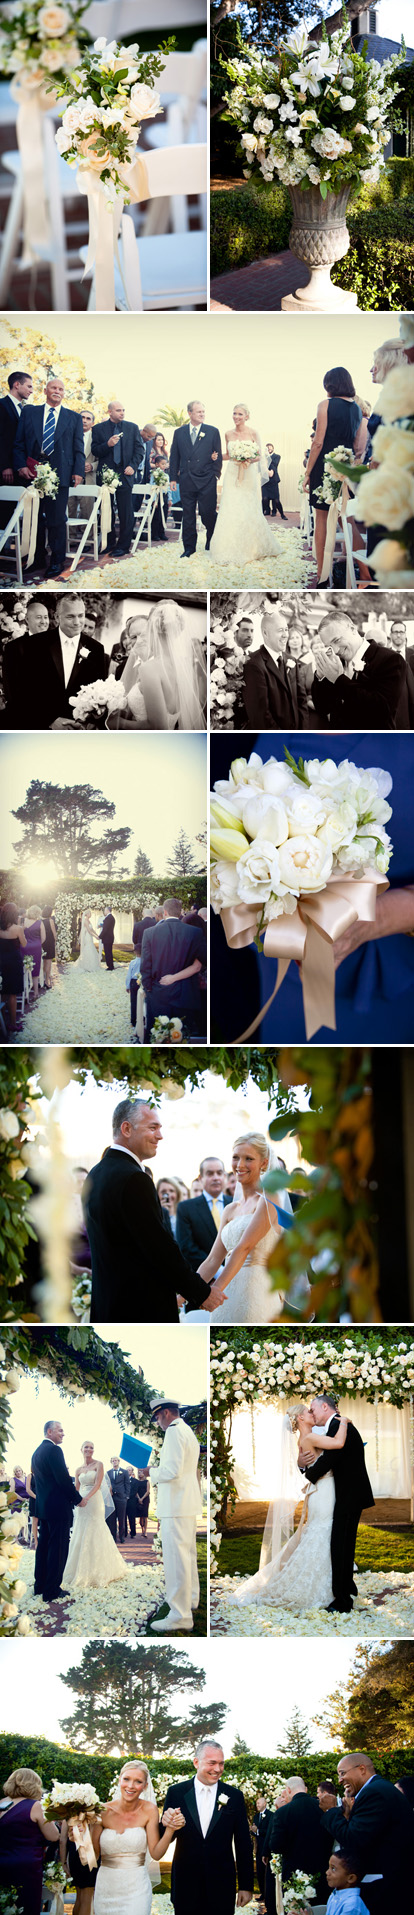 Fall Santa Barbara real wedding ceremony at The Valley Club of Montecito, cream, silver and gold wedding flowers, photographed by Boutwell Studio